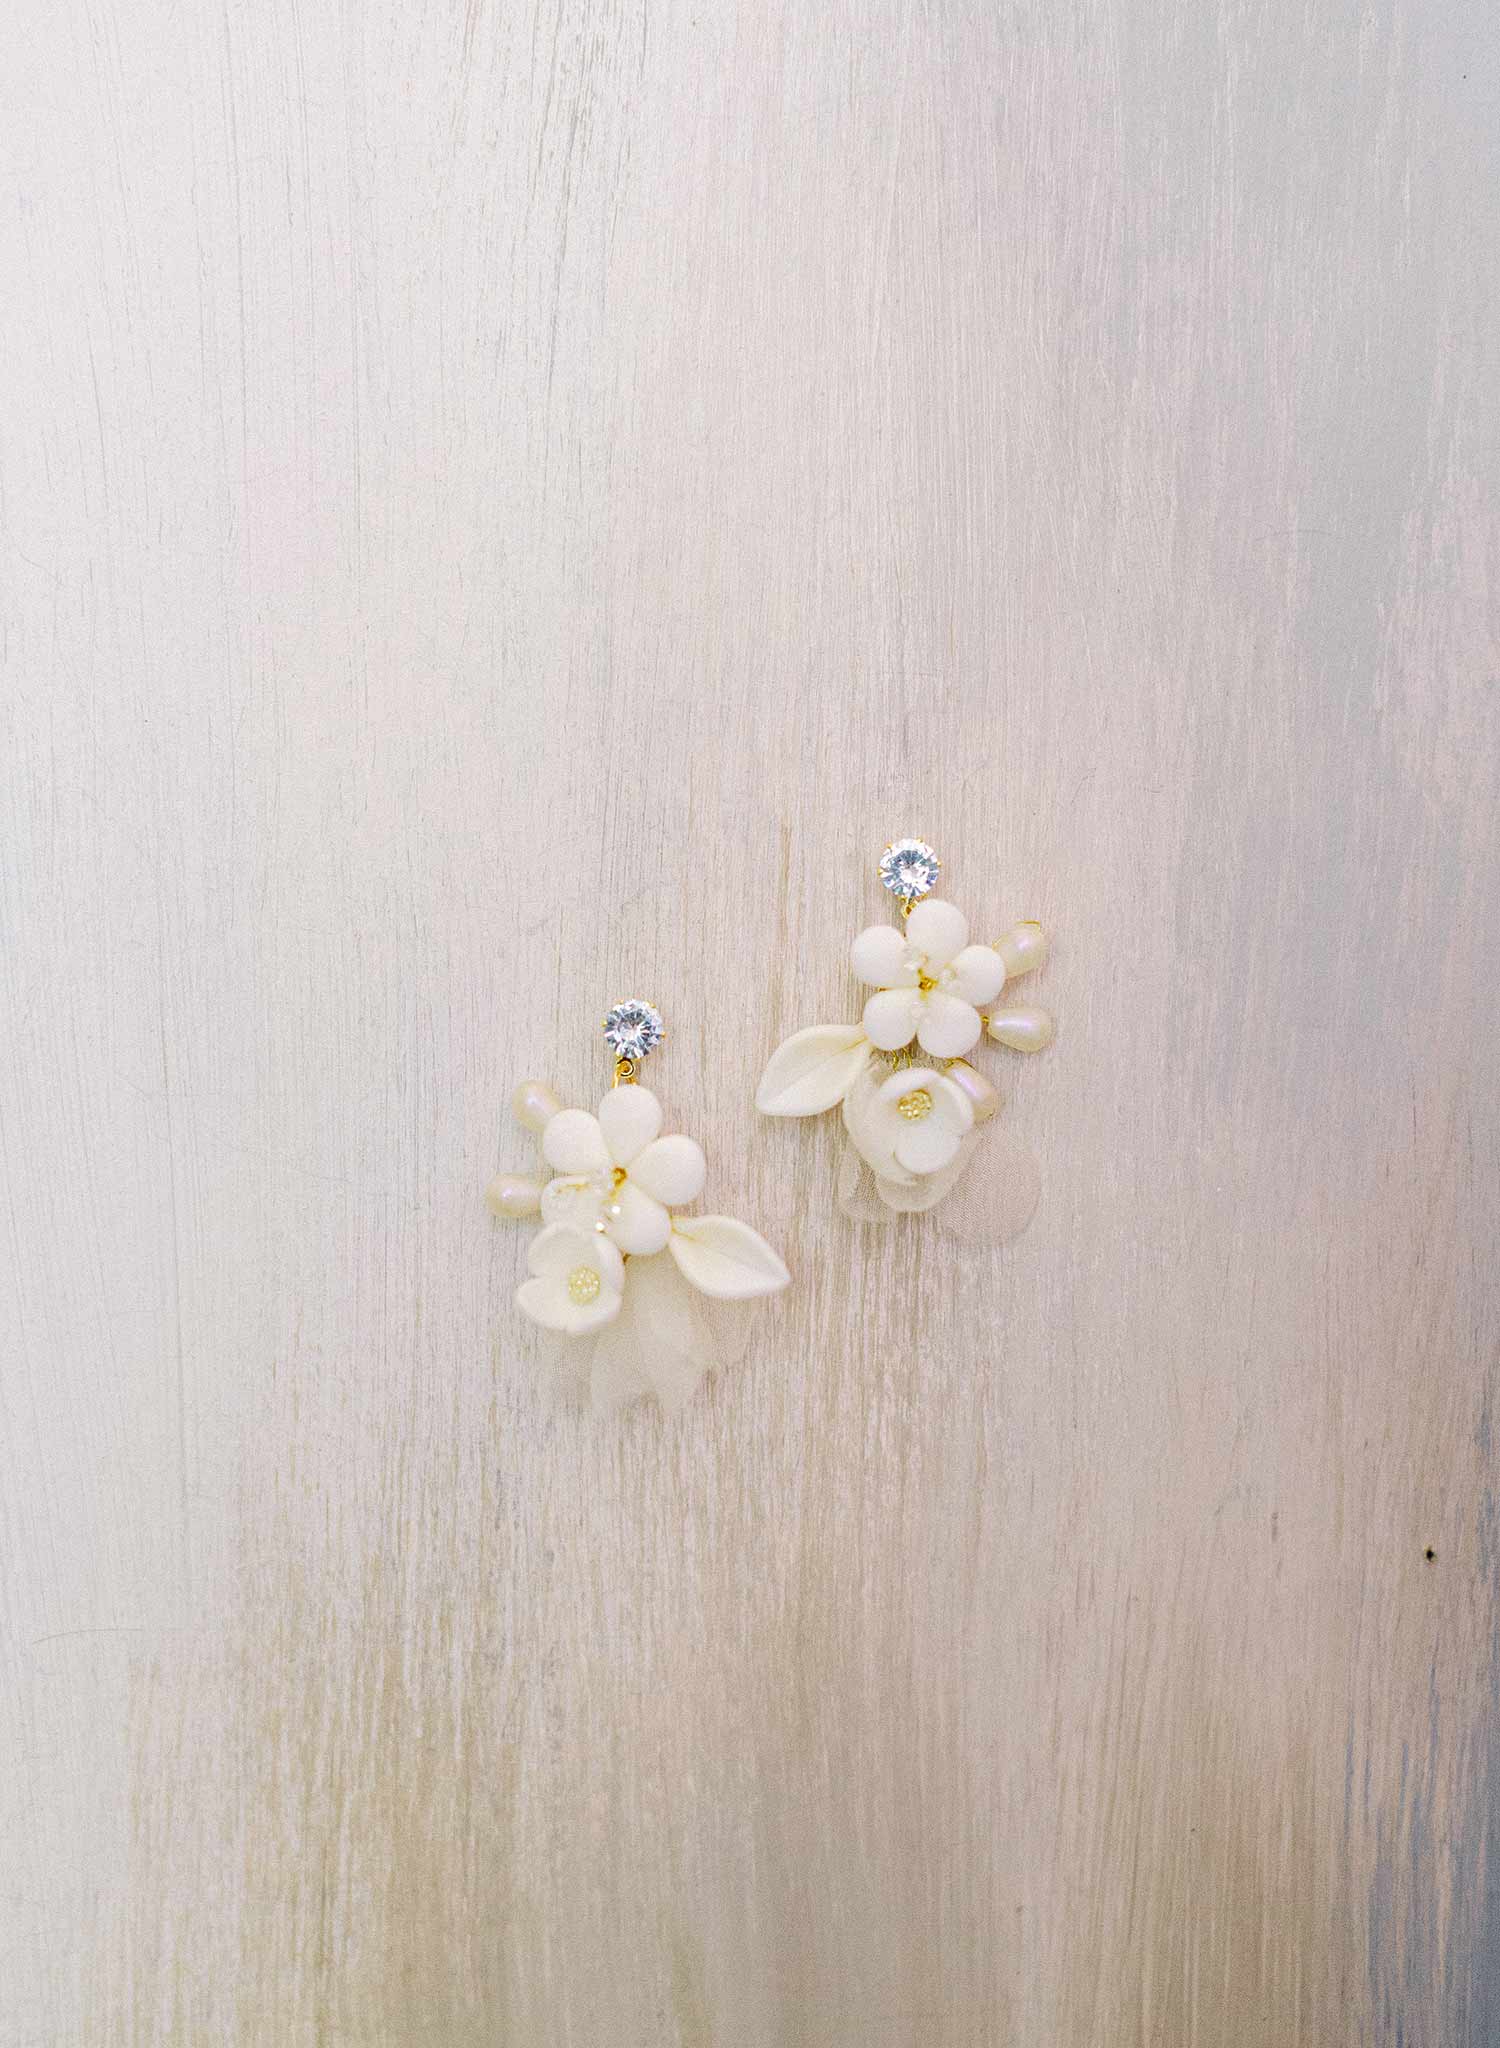 Plum blossom and silk cluster earrings - Style #2310